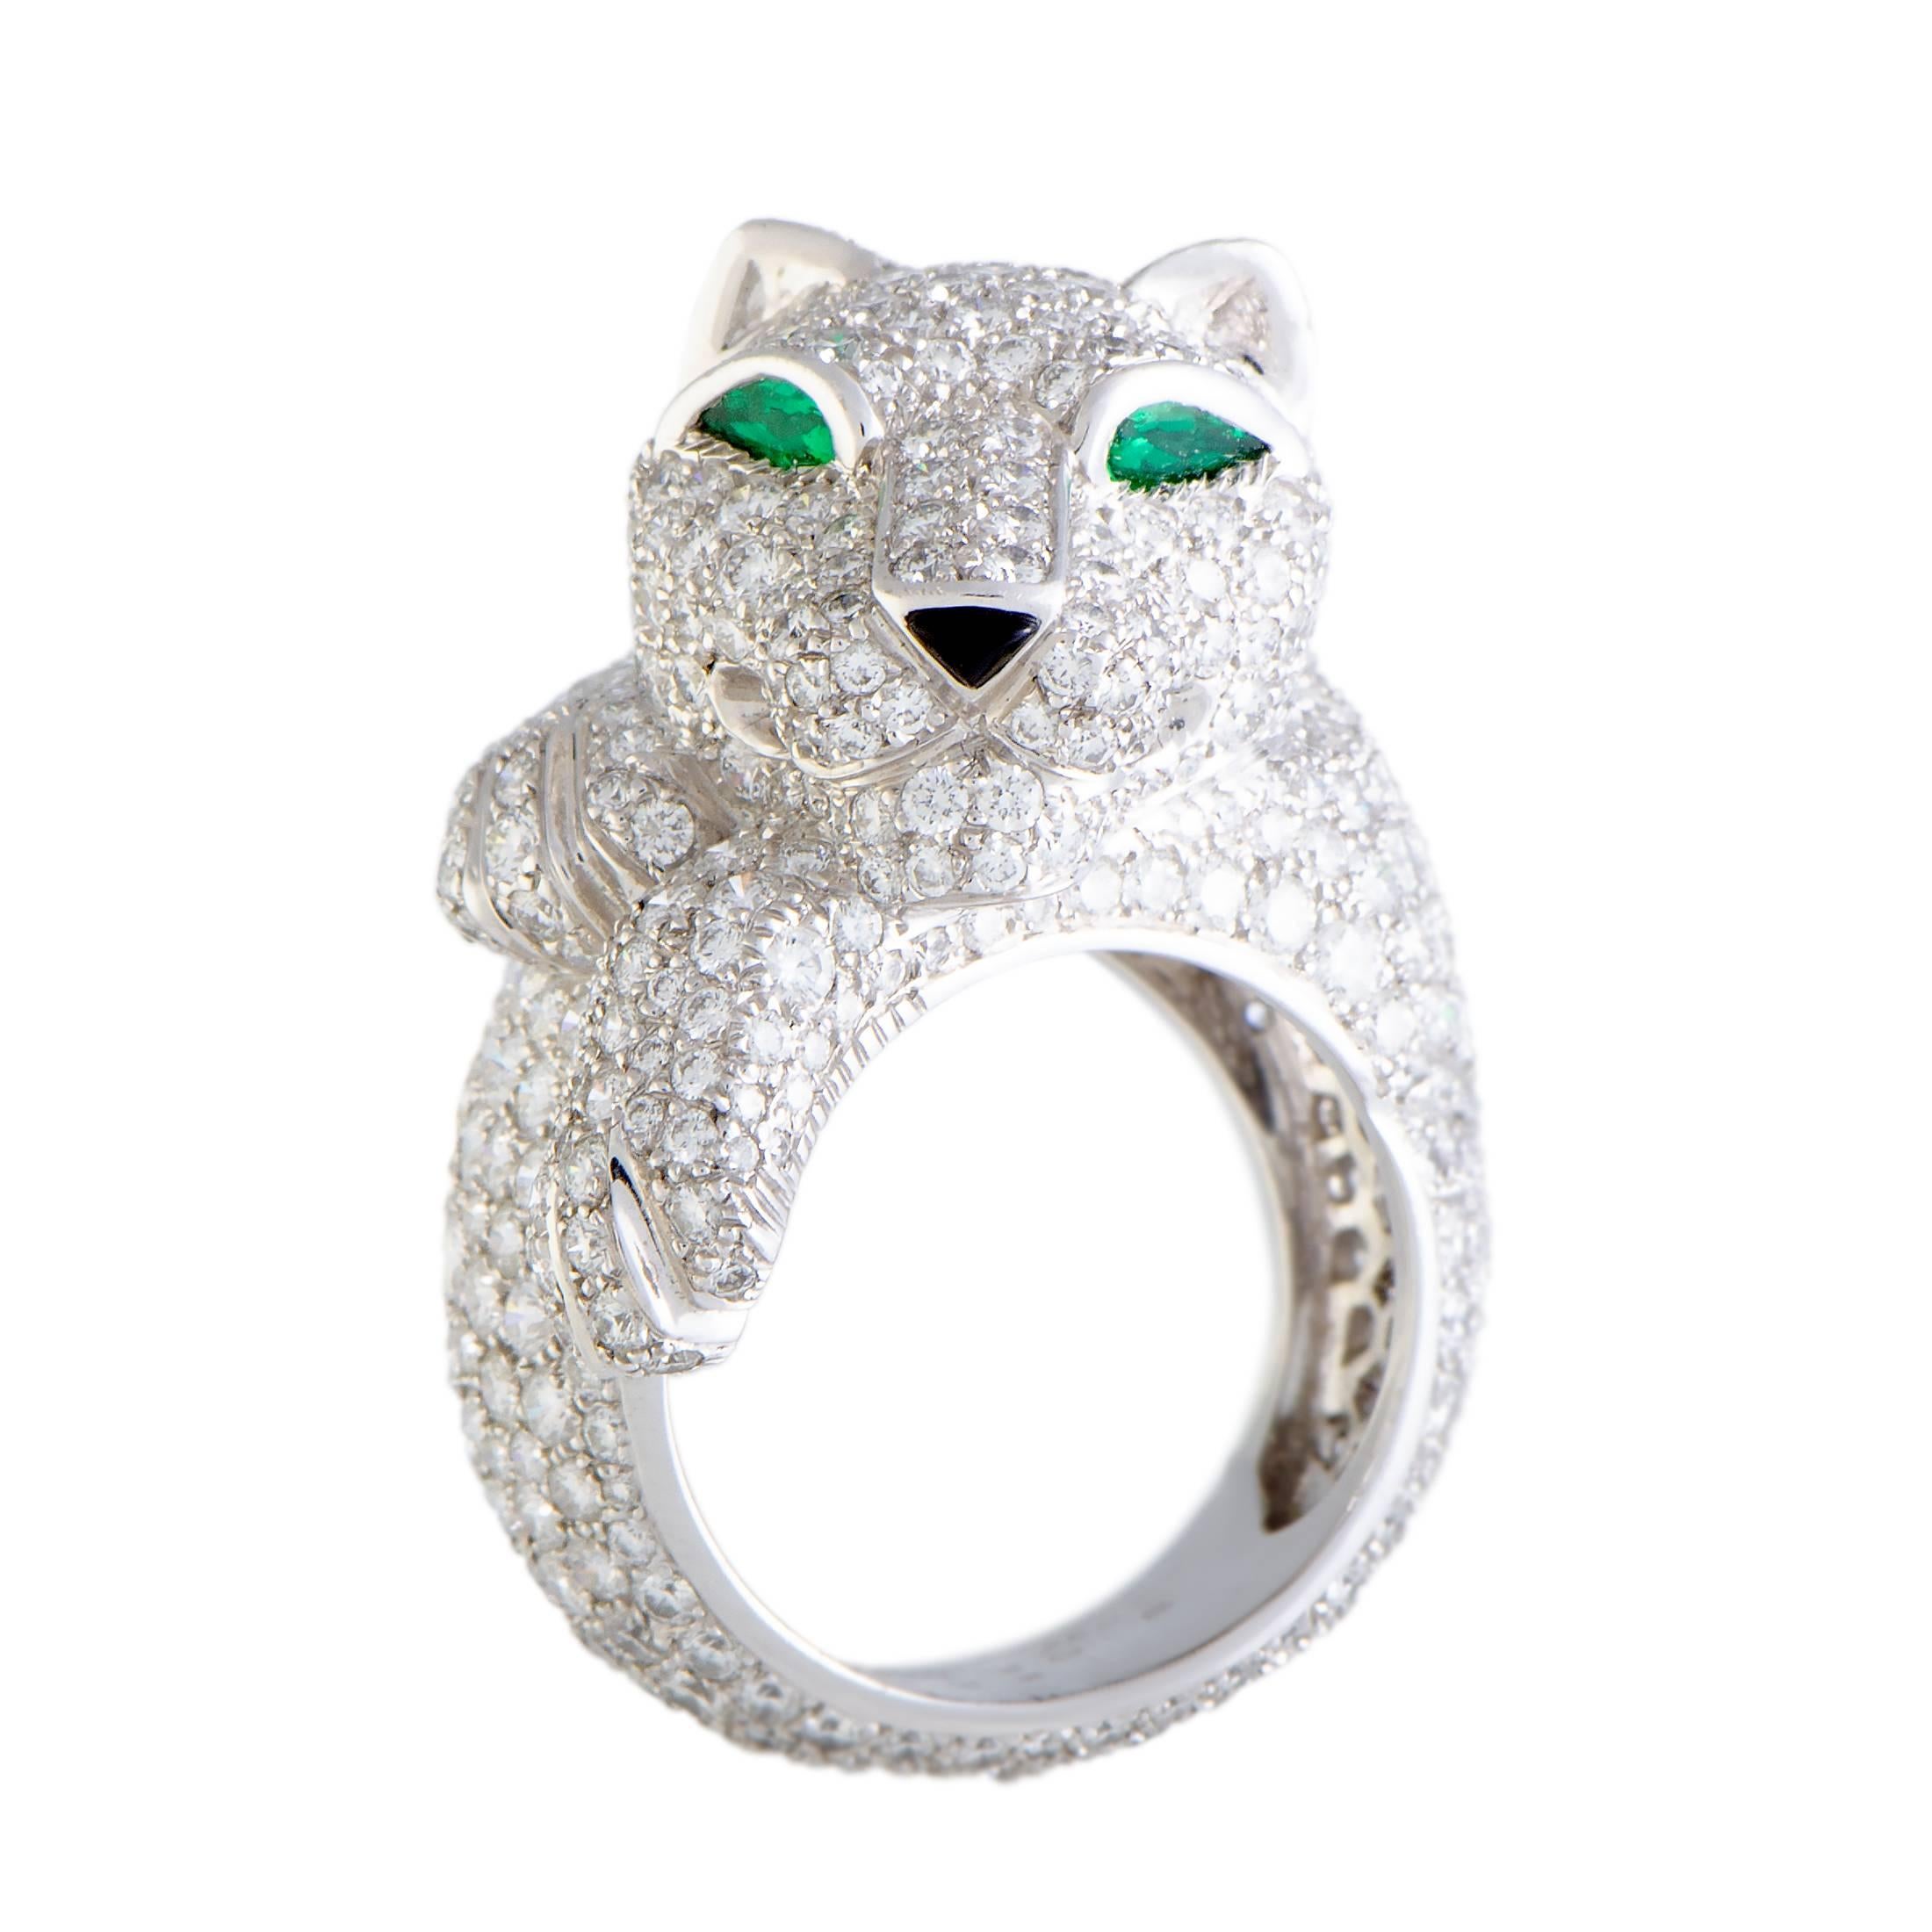 A compellingly luxurious creation of the brand's famous panther motif, this superb ring offers a look of absolute prestige and extravagance. Presented by Cartier, the ring is crafted from elegantly gleaming 18K white gold and it weighs 22.8 grams.